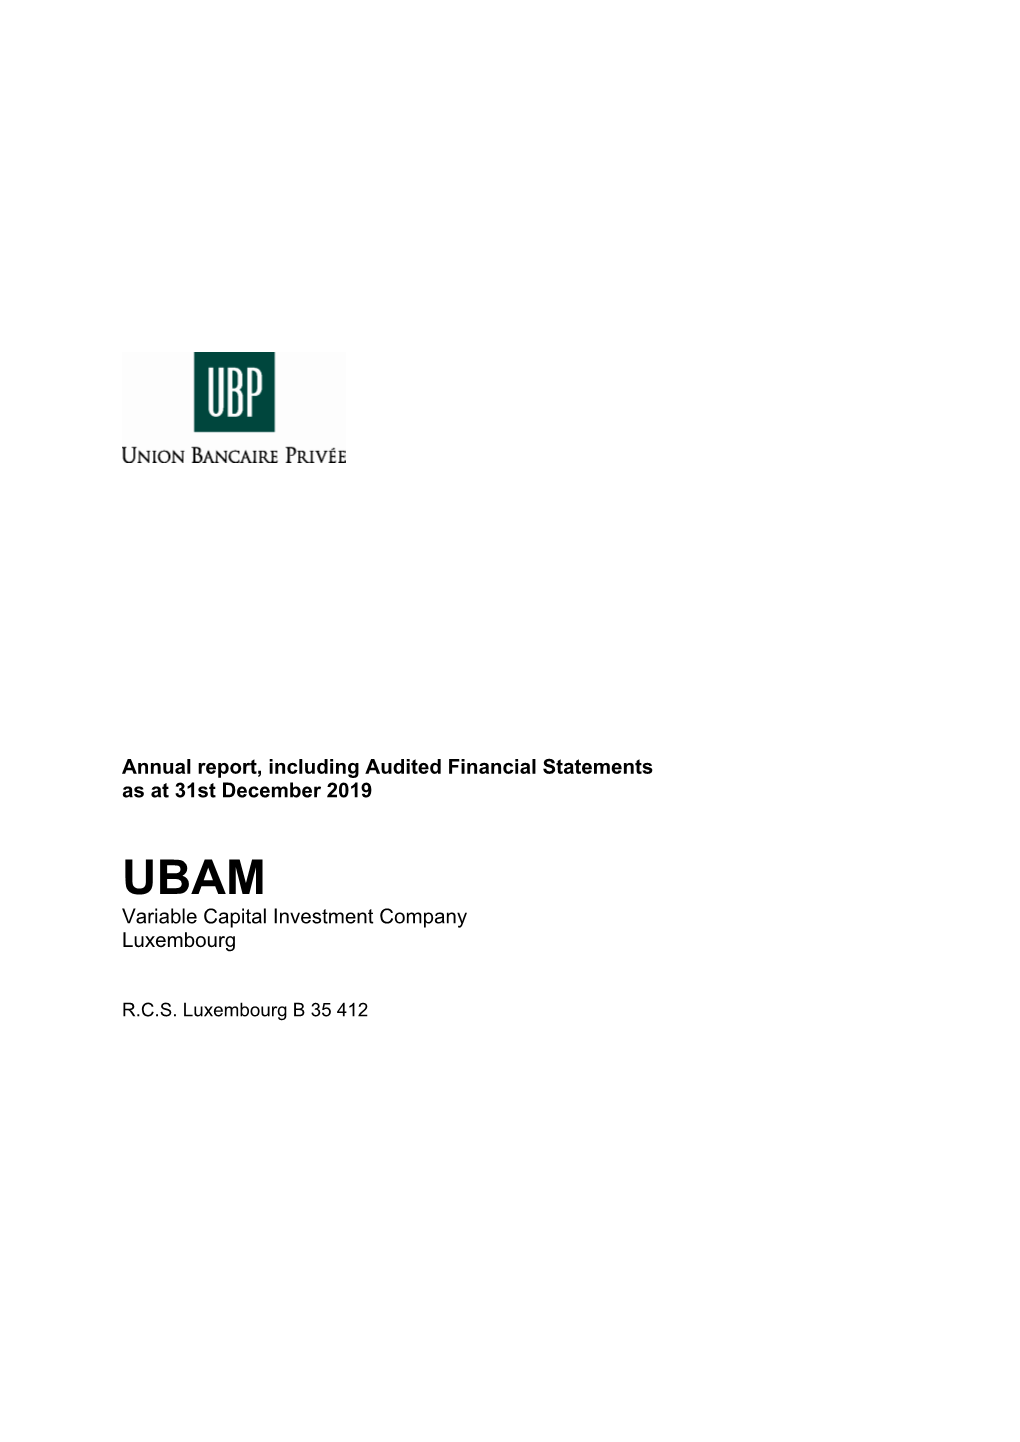 UBAM Variable Capital Investment Company Luxembourg